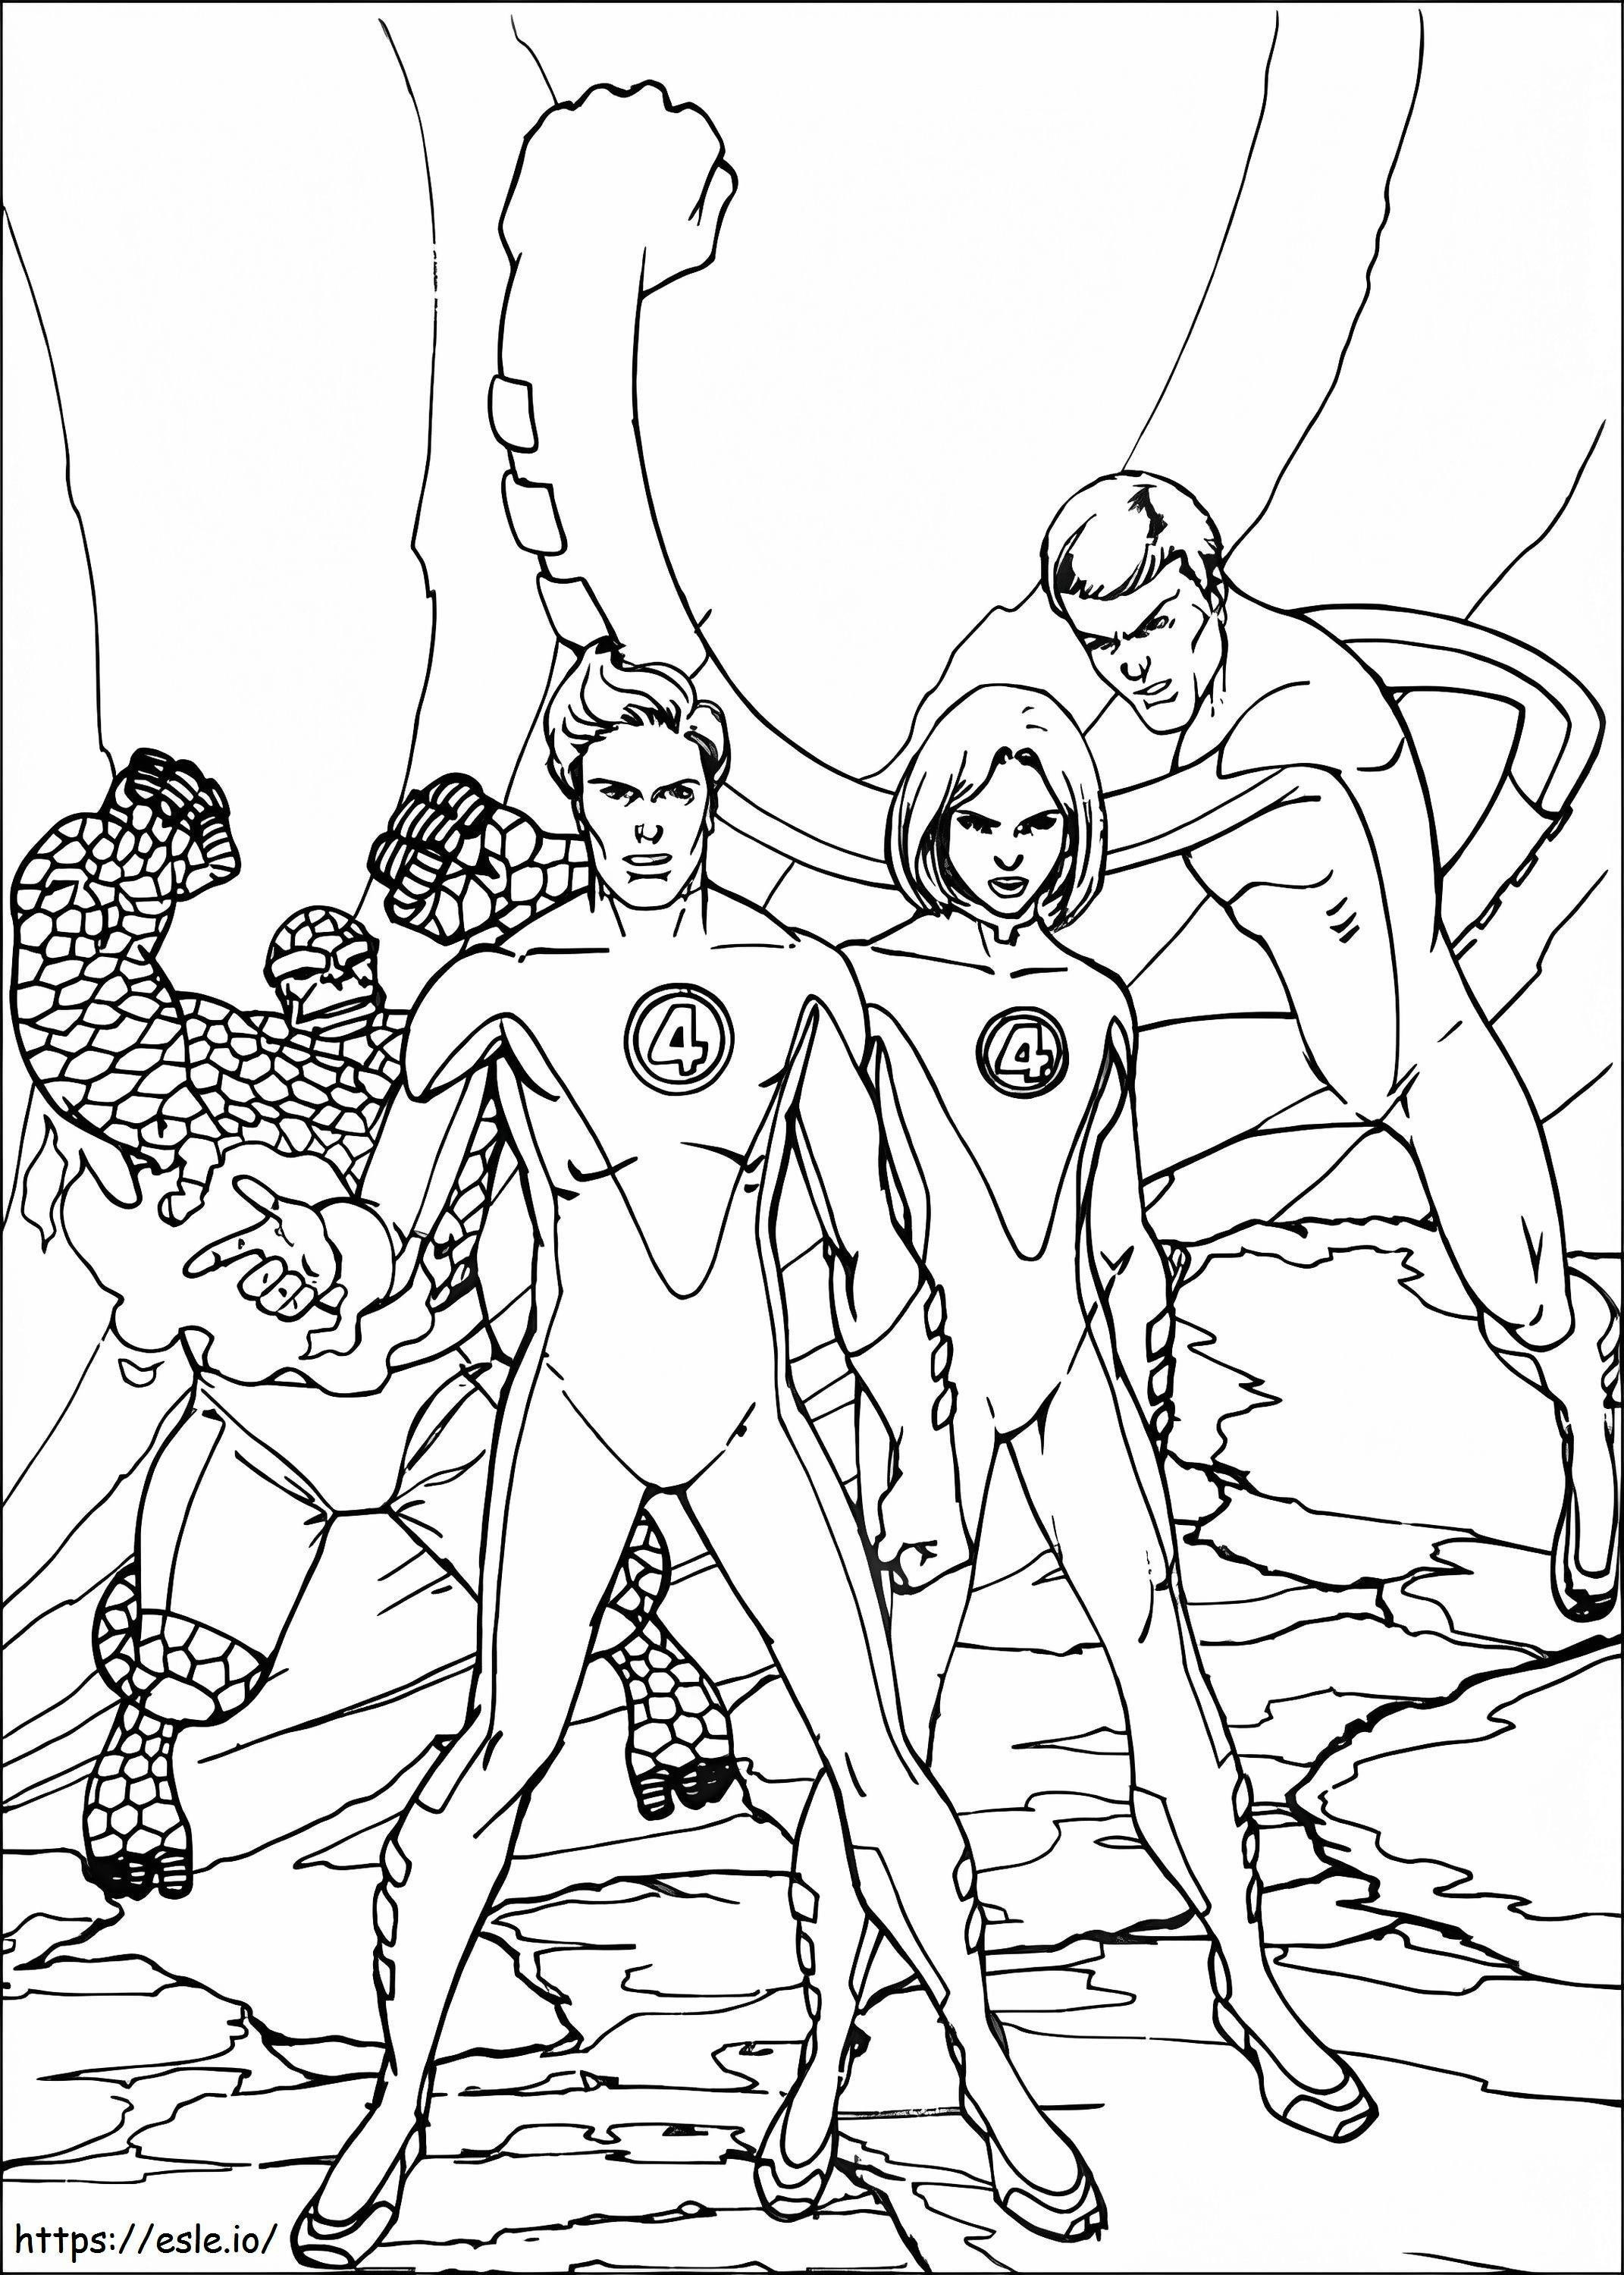 Awesome Fantastic Four coloring page